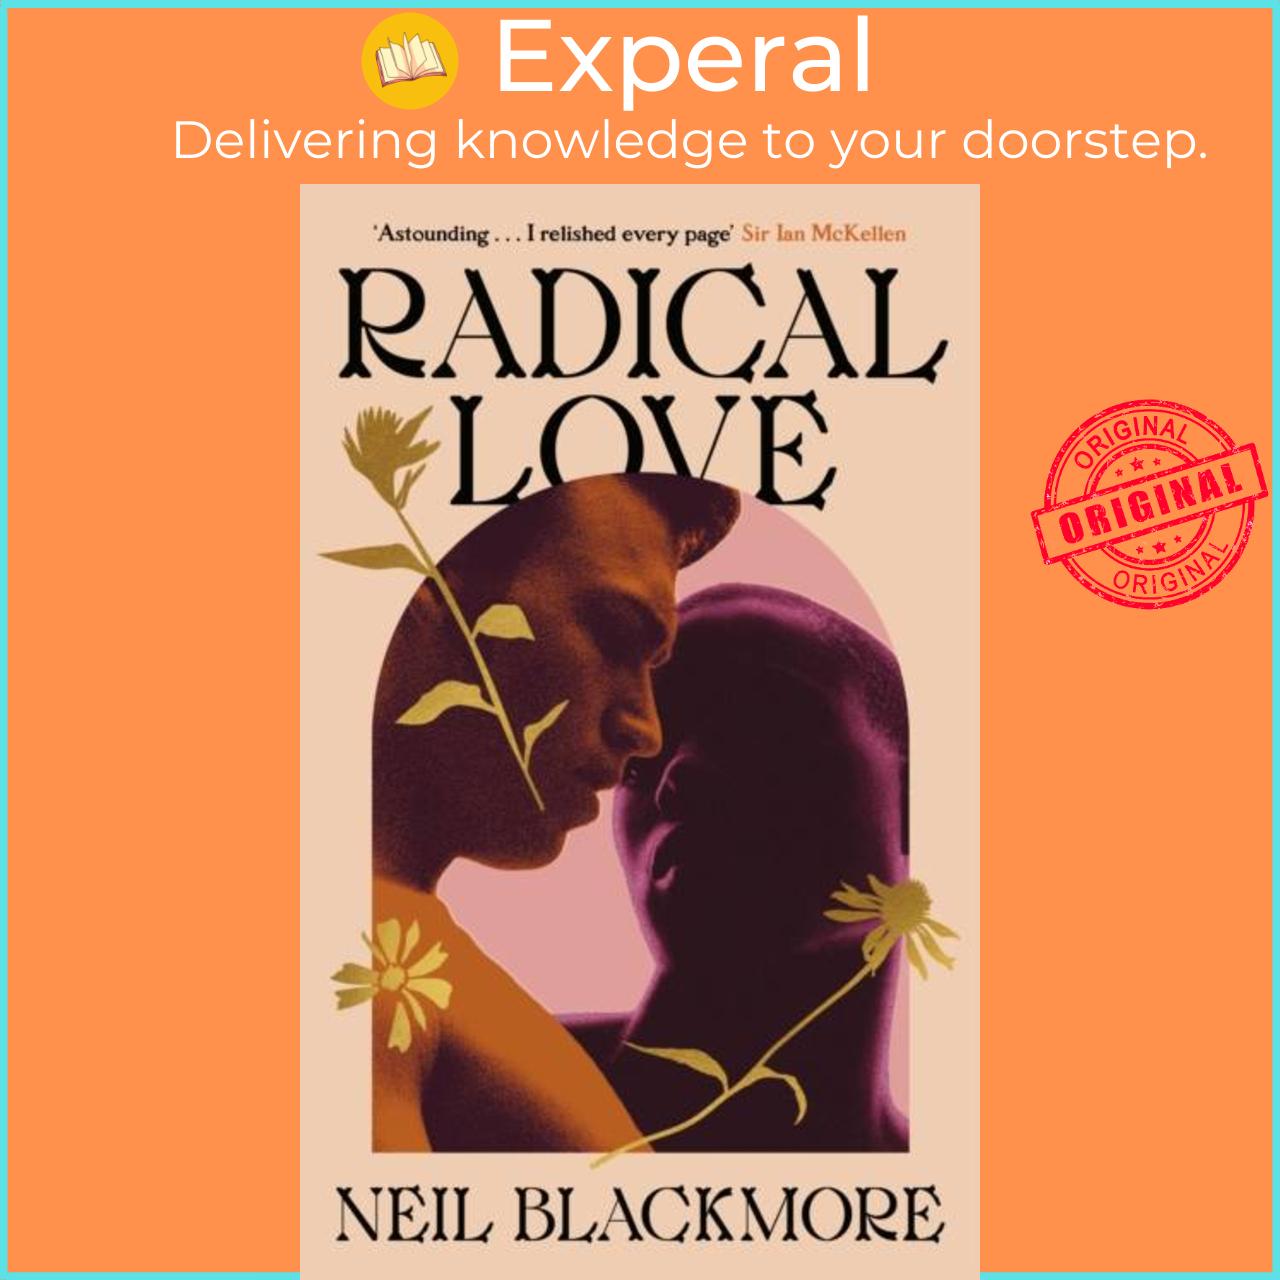 Sách - Radical Love by Neil Blackmore (UK edition, hardcover)